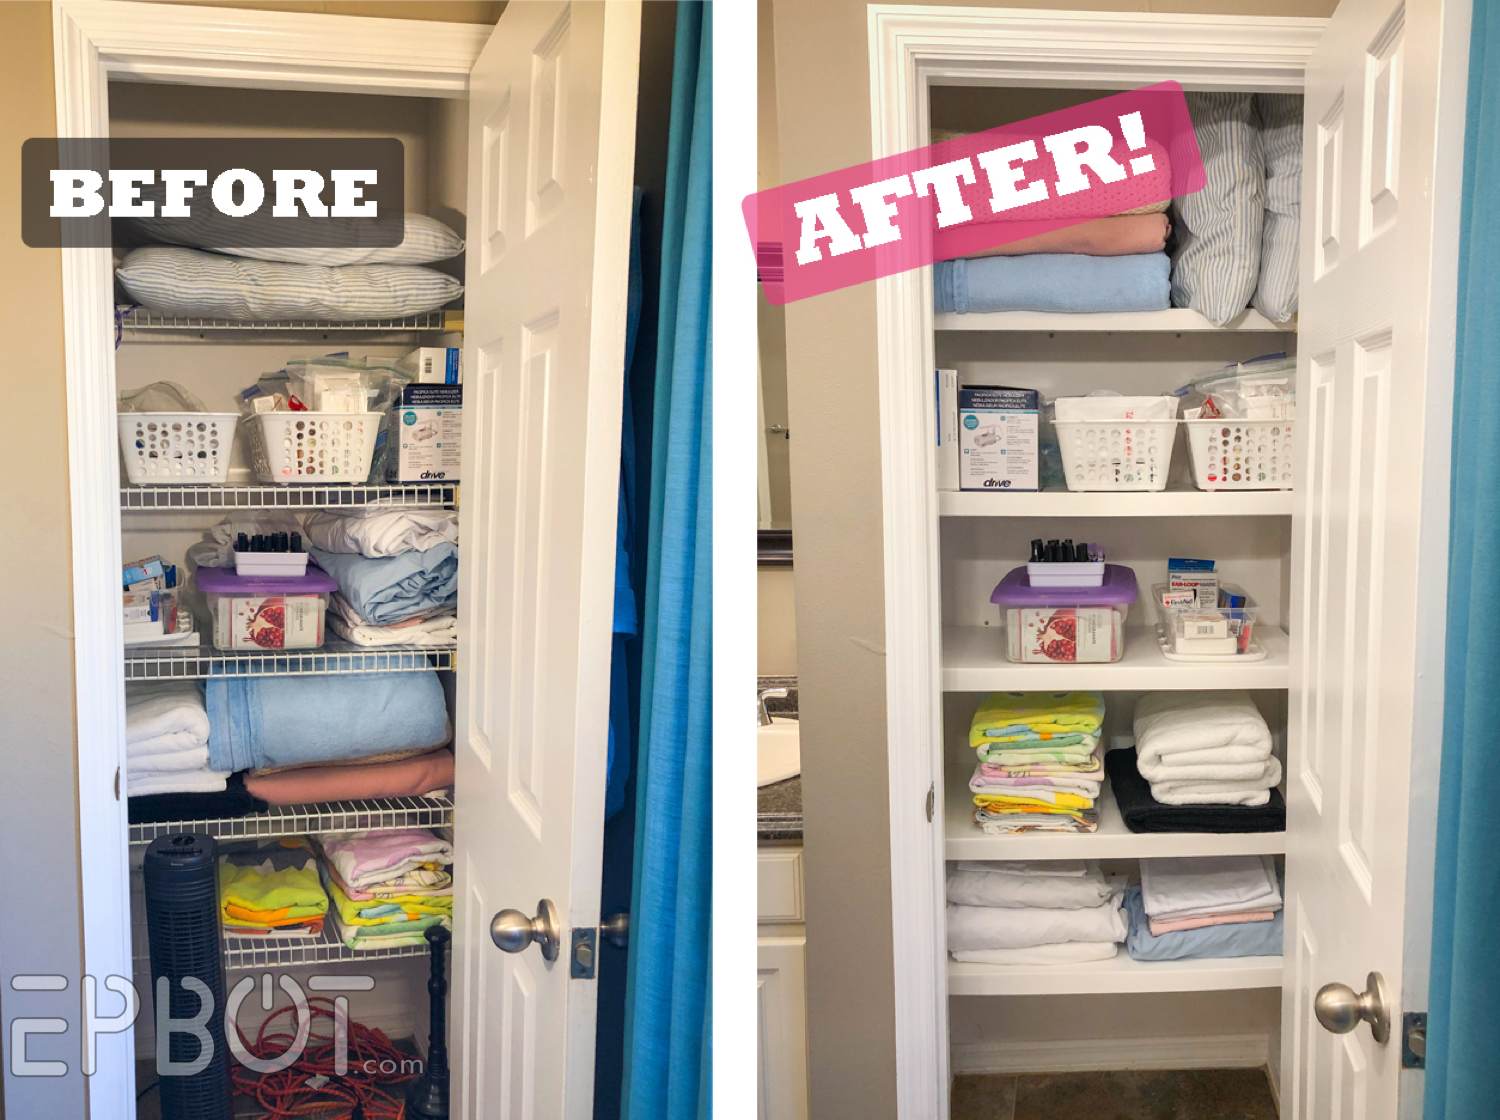 A Closet's Wire Shelving Becomes a Design Feature - Before and After Photos